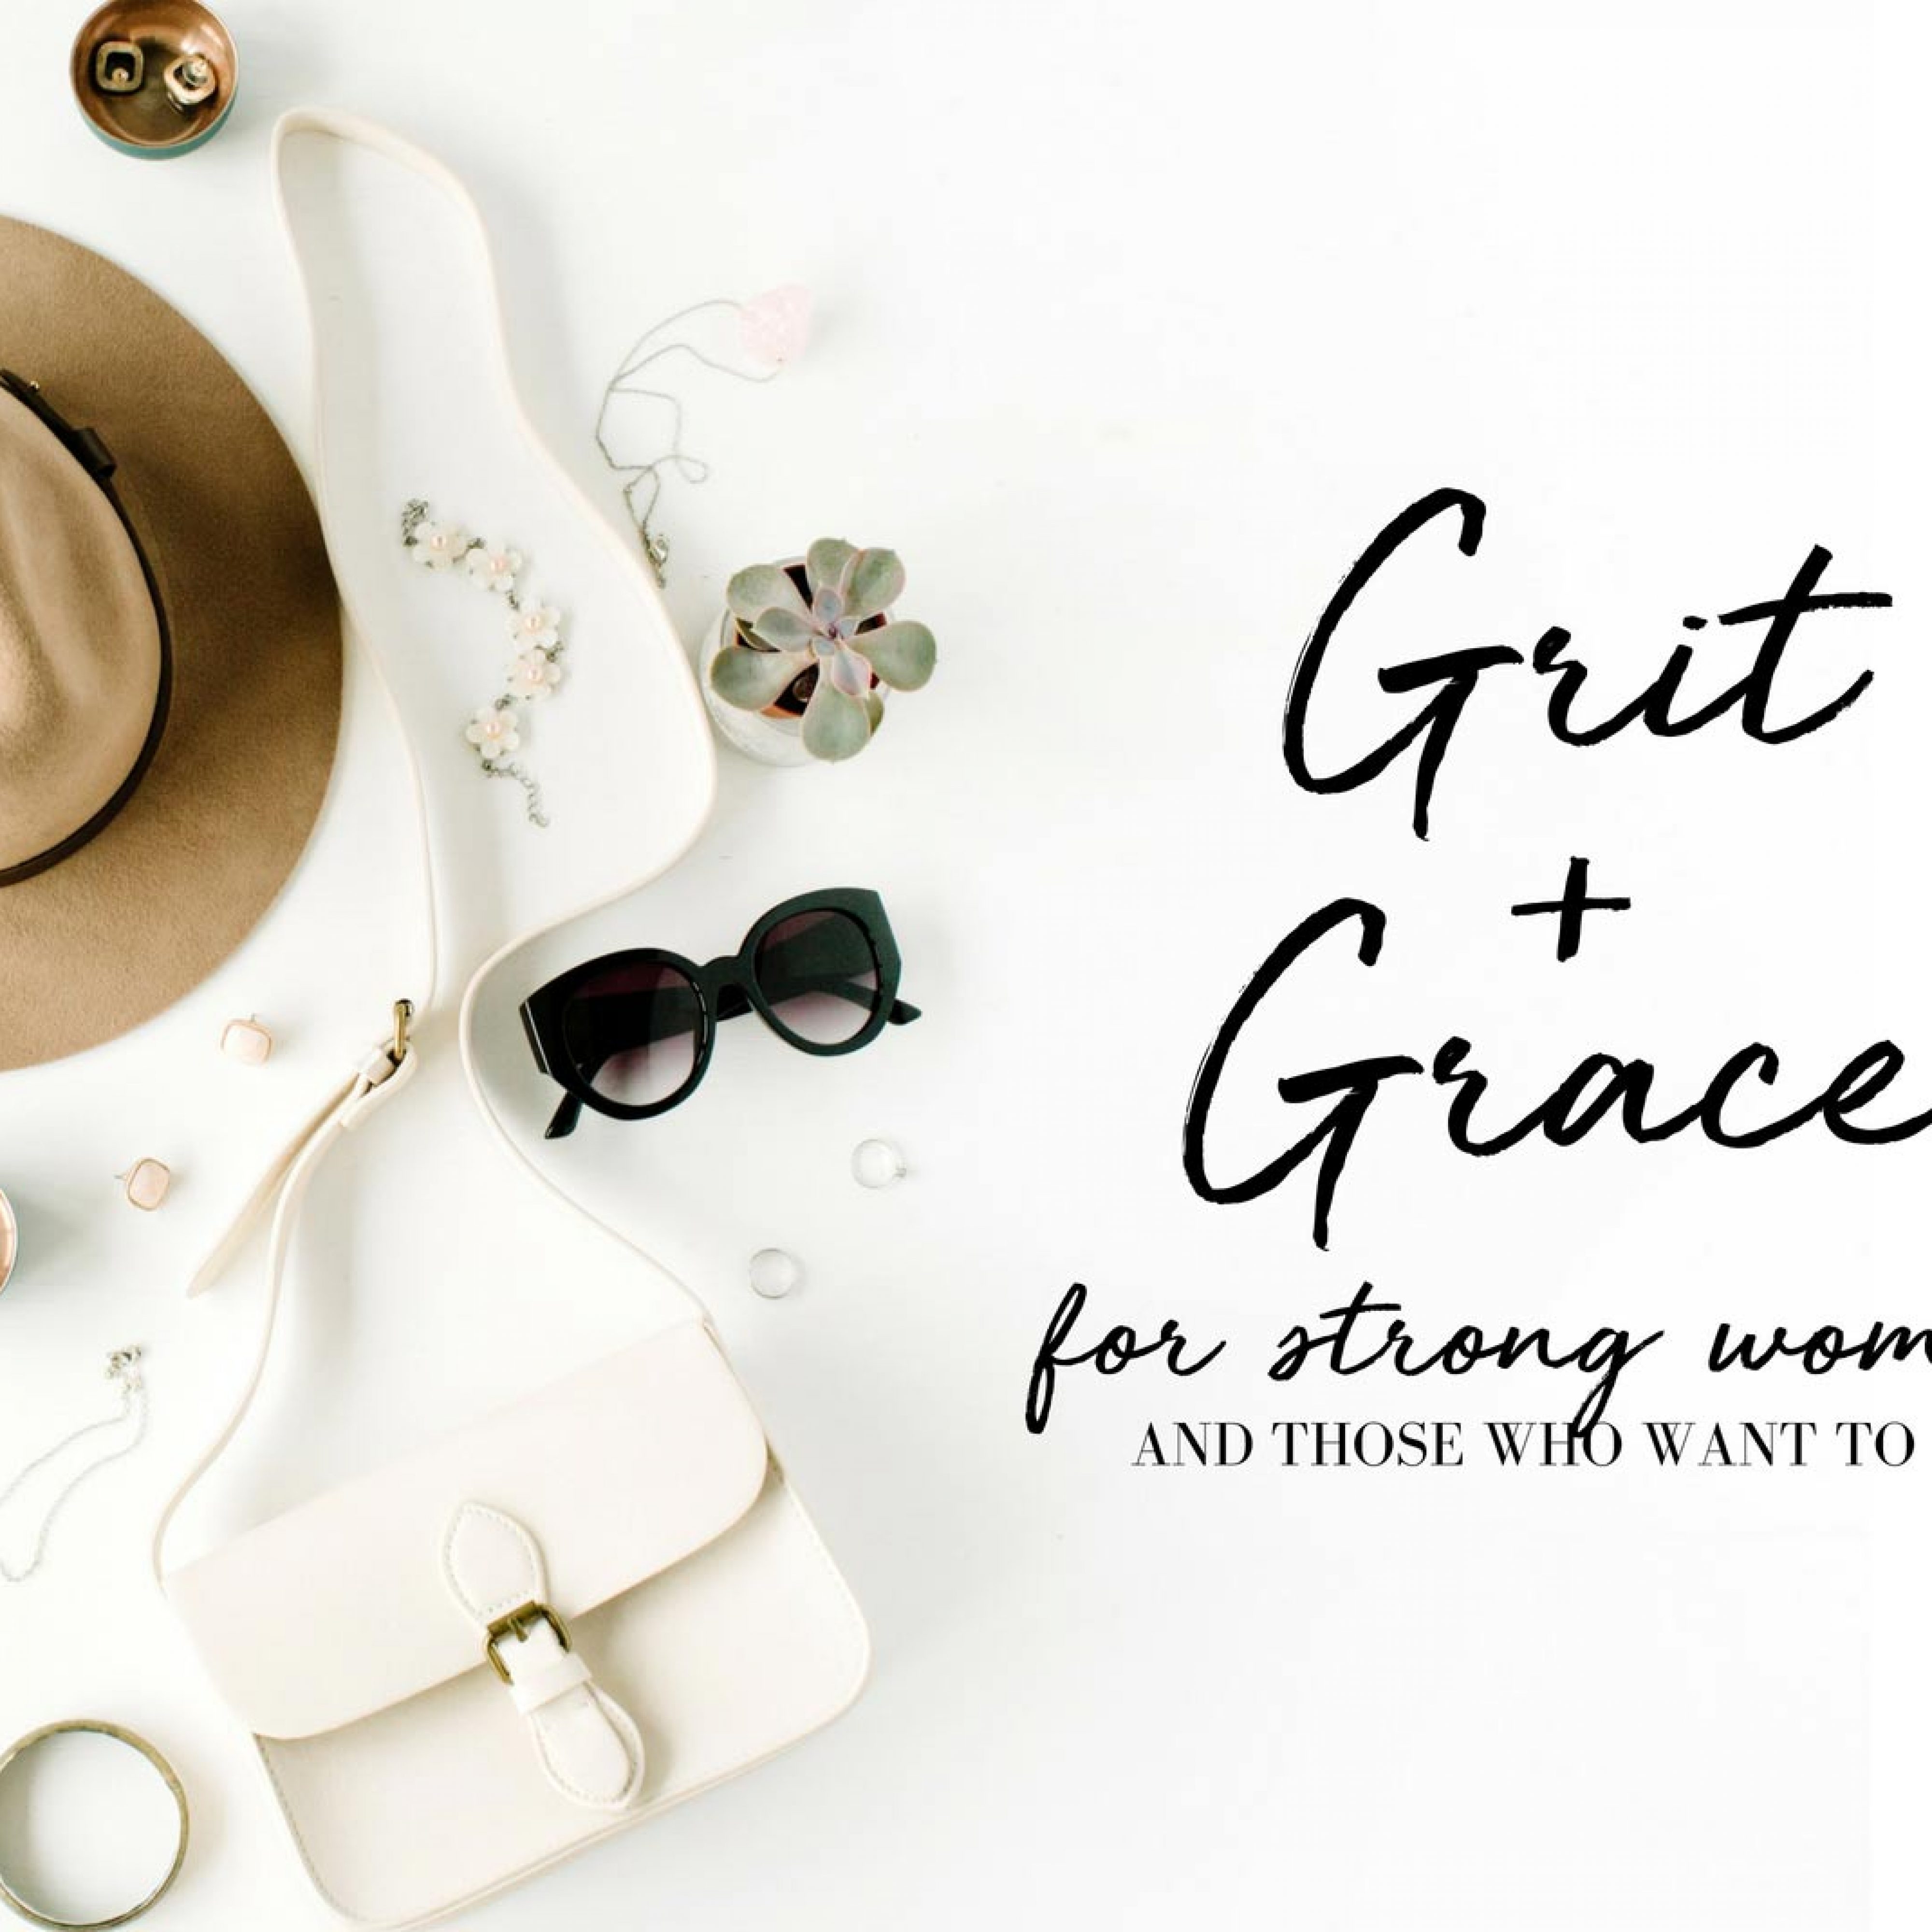 The Grit and Grace Project